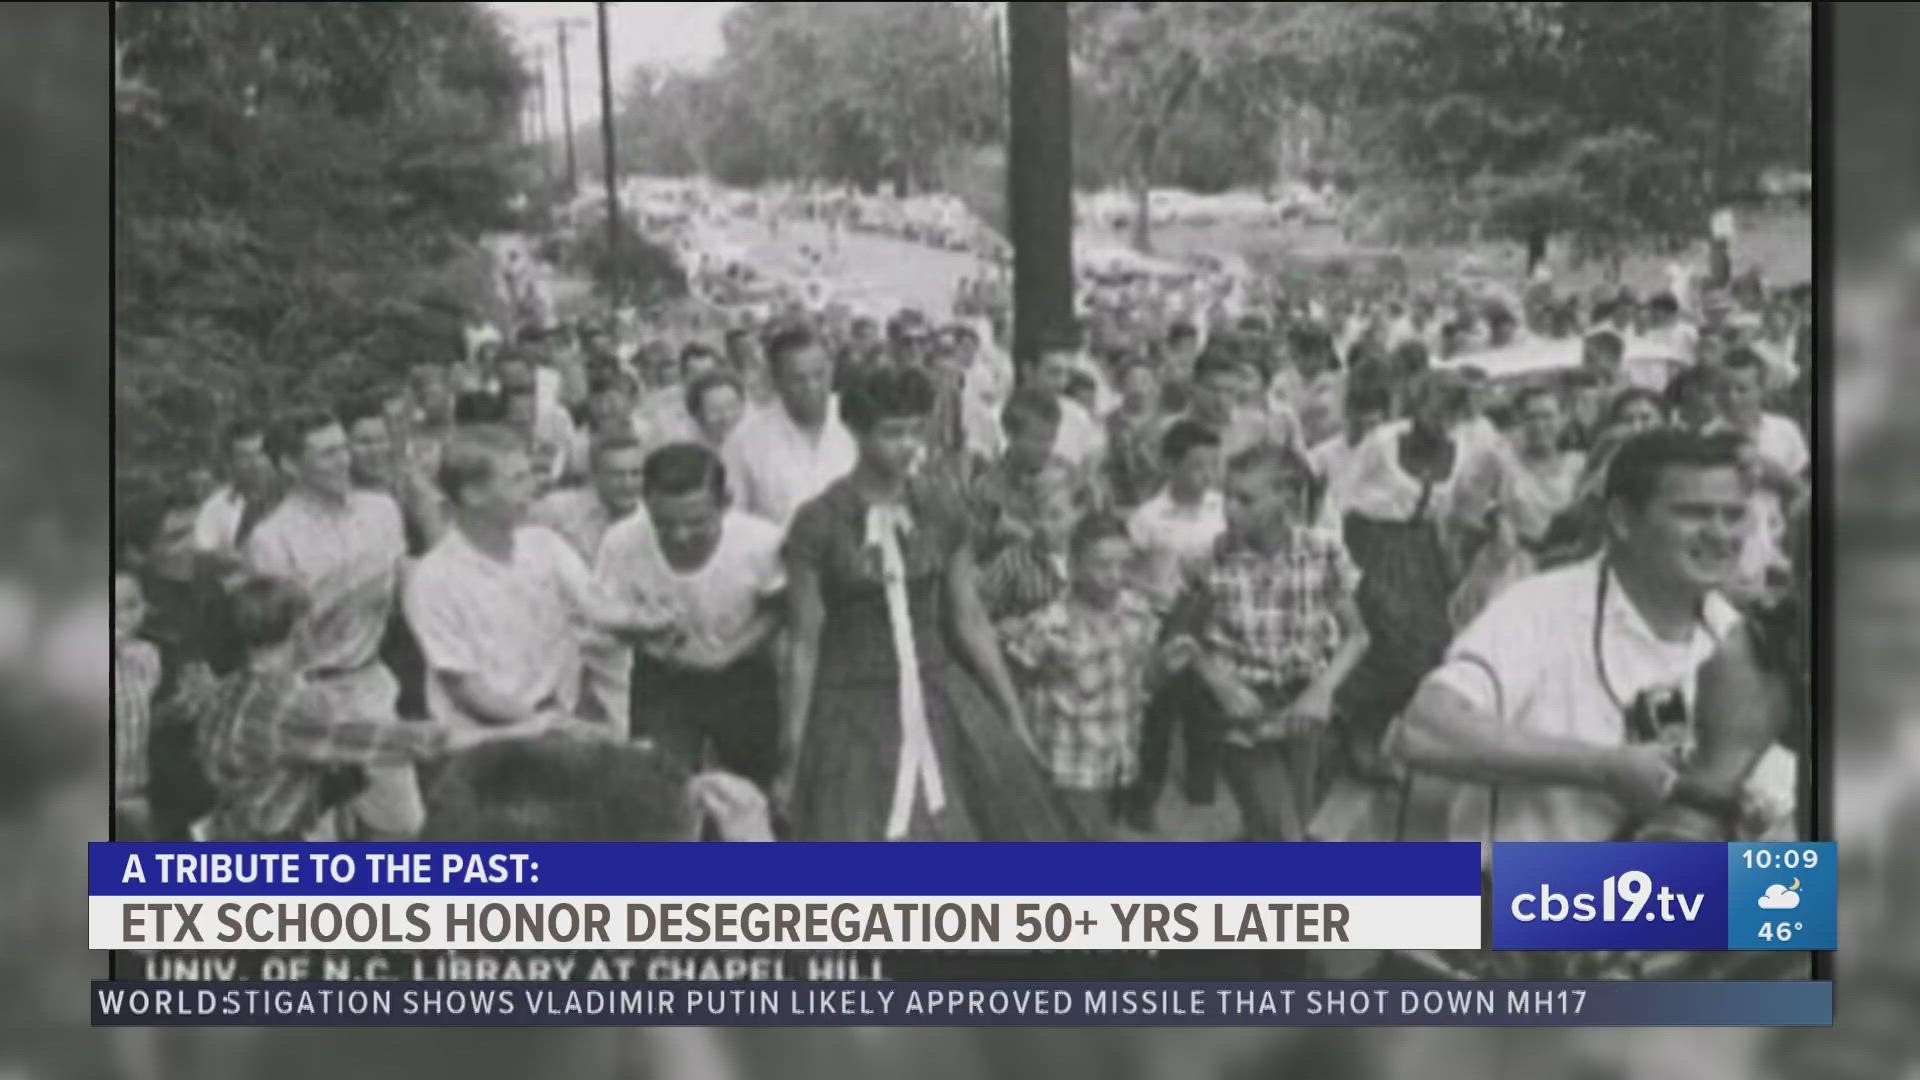 CBS19 celebrates Black History month by taking a deeper look into how schools honored desegregation over 50 years later